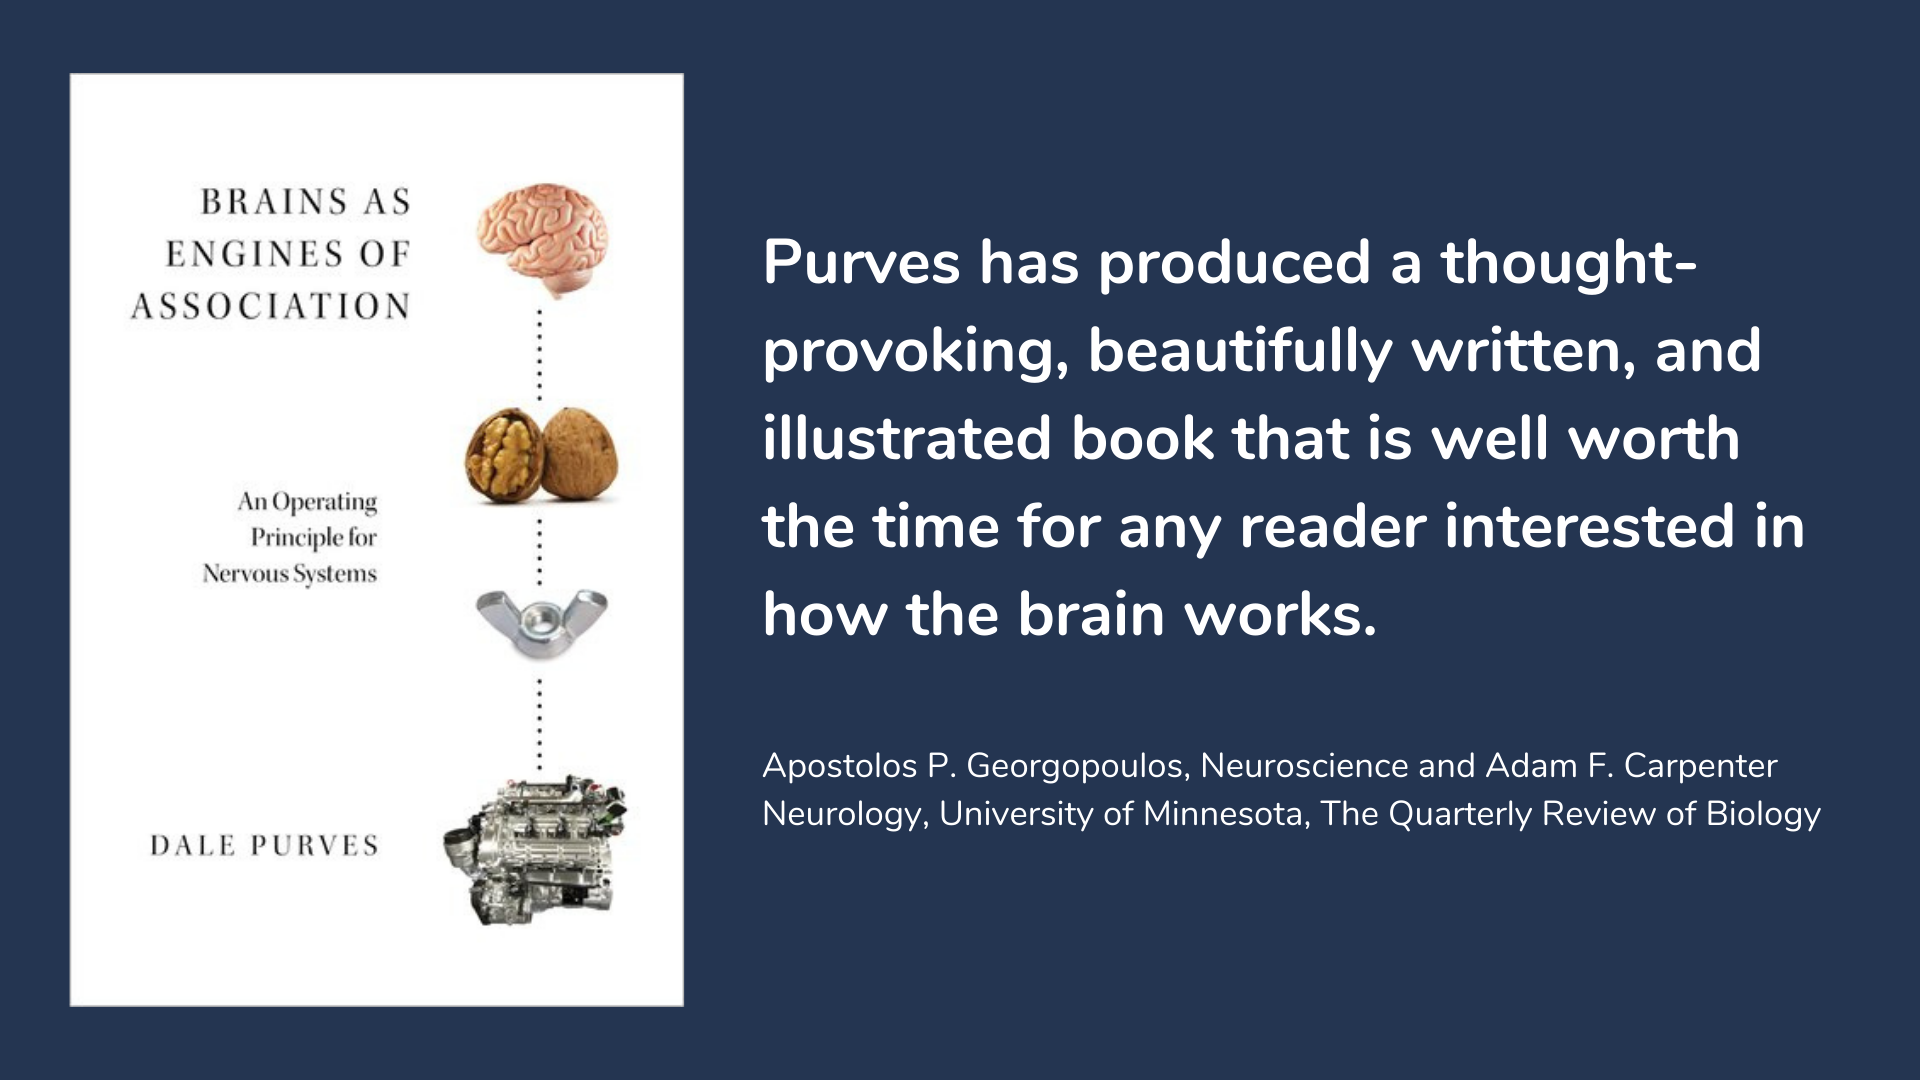 Brains as Engines of Association, book cover and description.